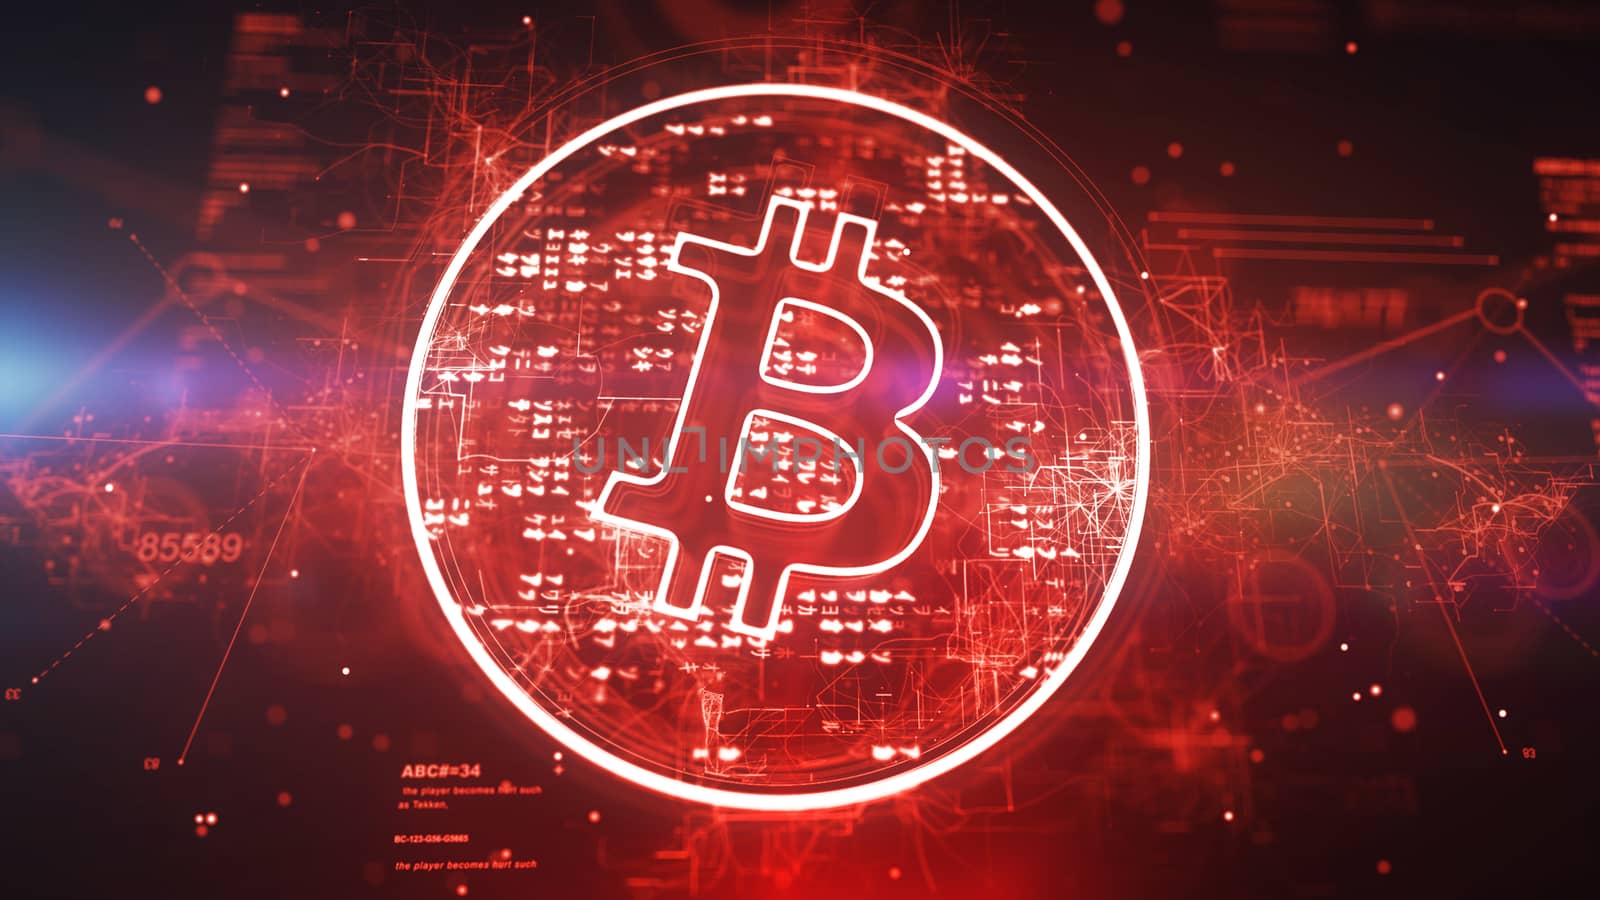 Optical art 3d illustration of a bitcoin sign put in a shining red circle and rotating slowly in the red background. It looks successful and optimistic inspiring for new crypto victories